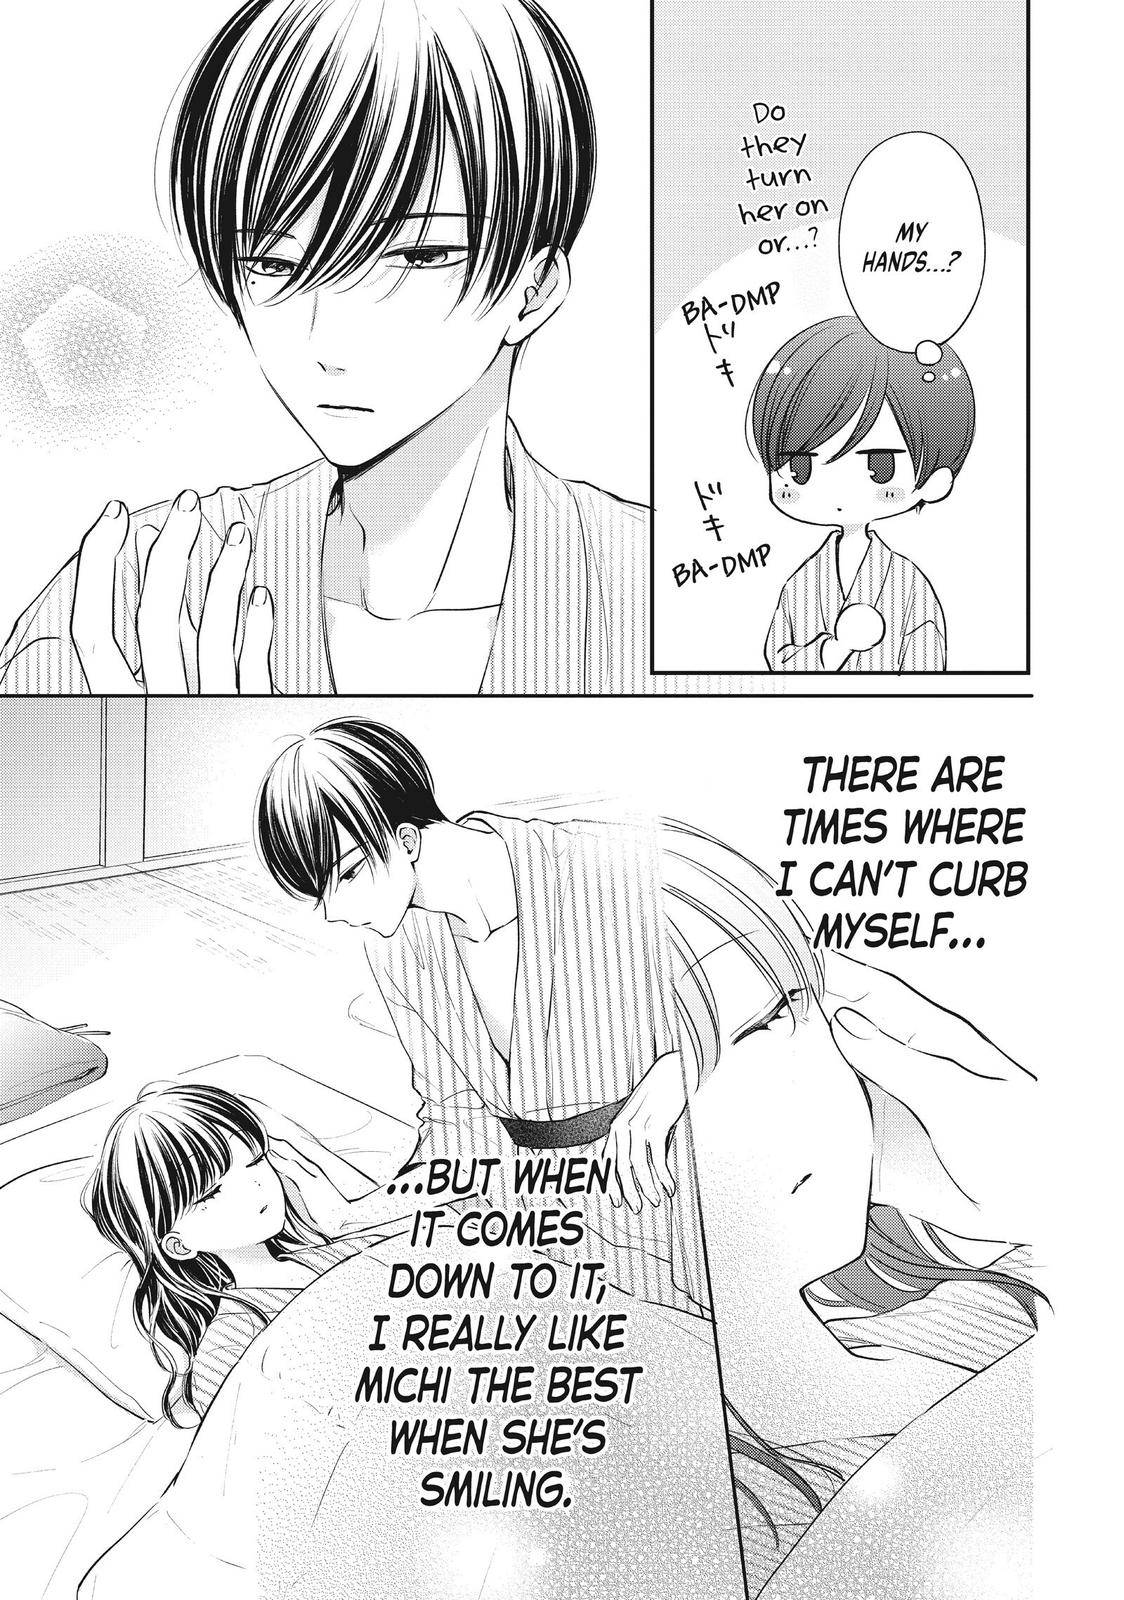 Chihiro-kun Only Has Eyes for Me - chapter 24.5 - #3